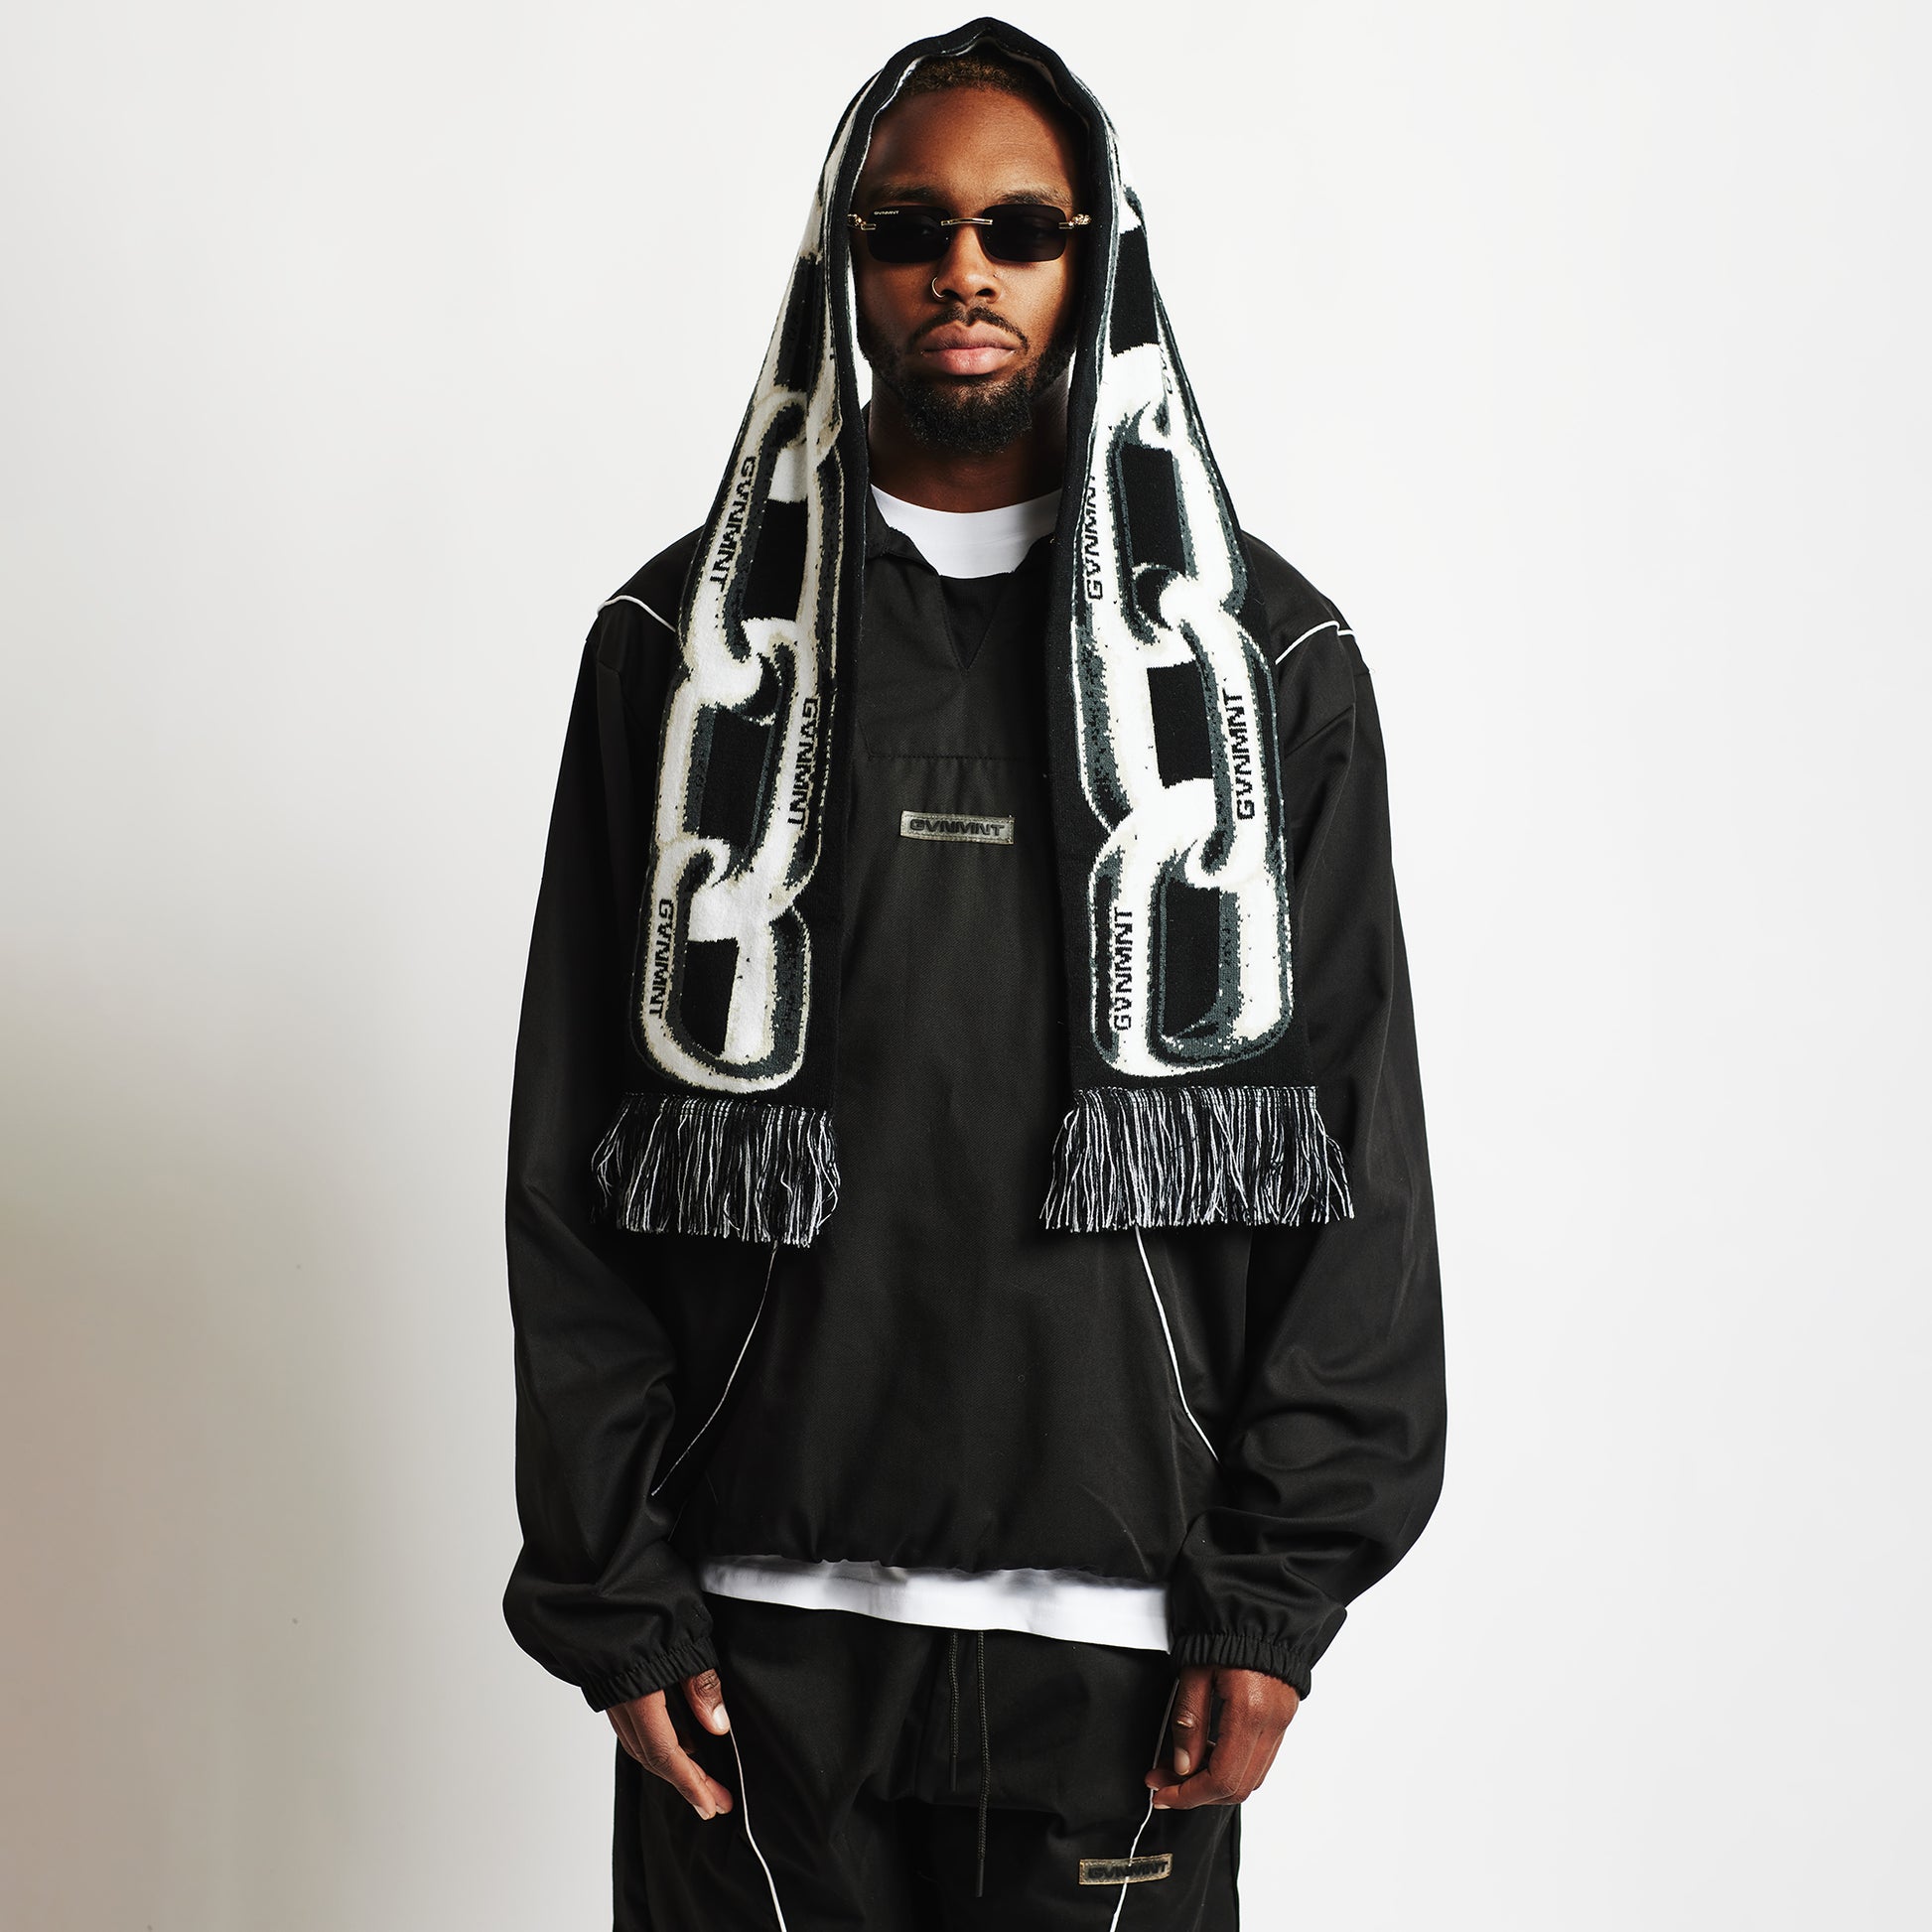 Chained Scarf - GVNMNT Clothing Co', European streetwear.